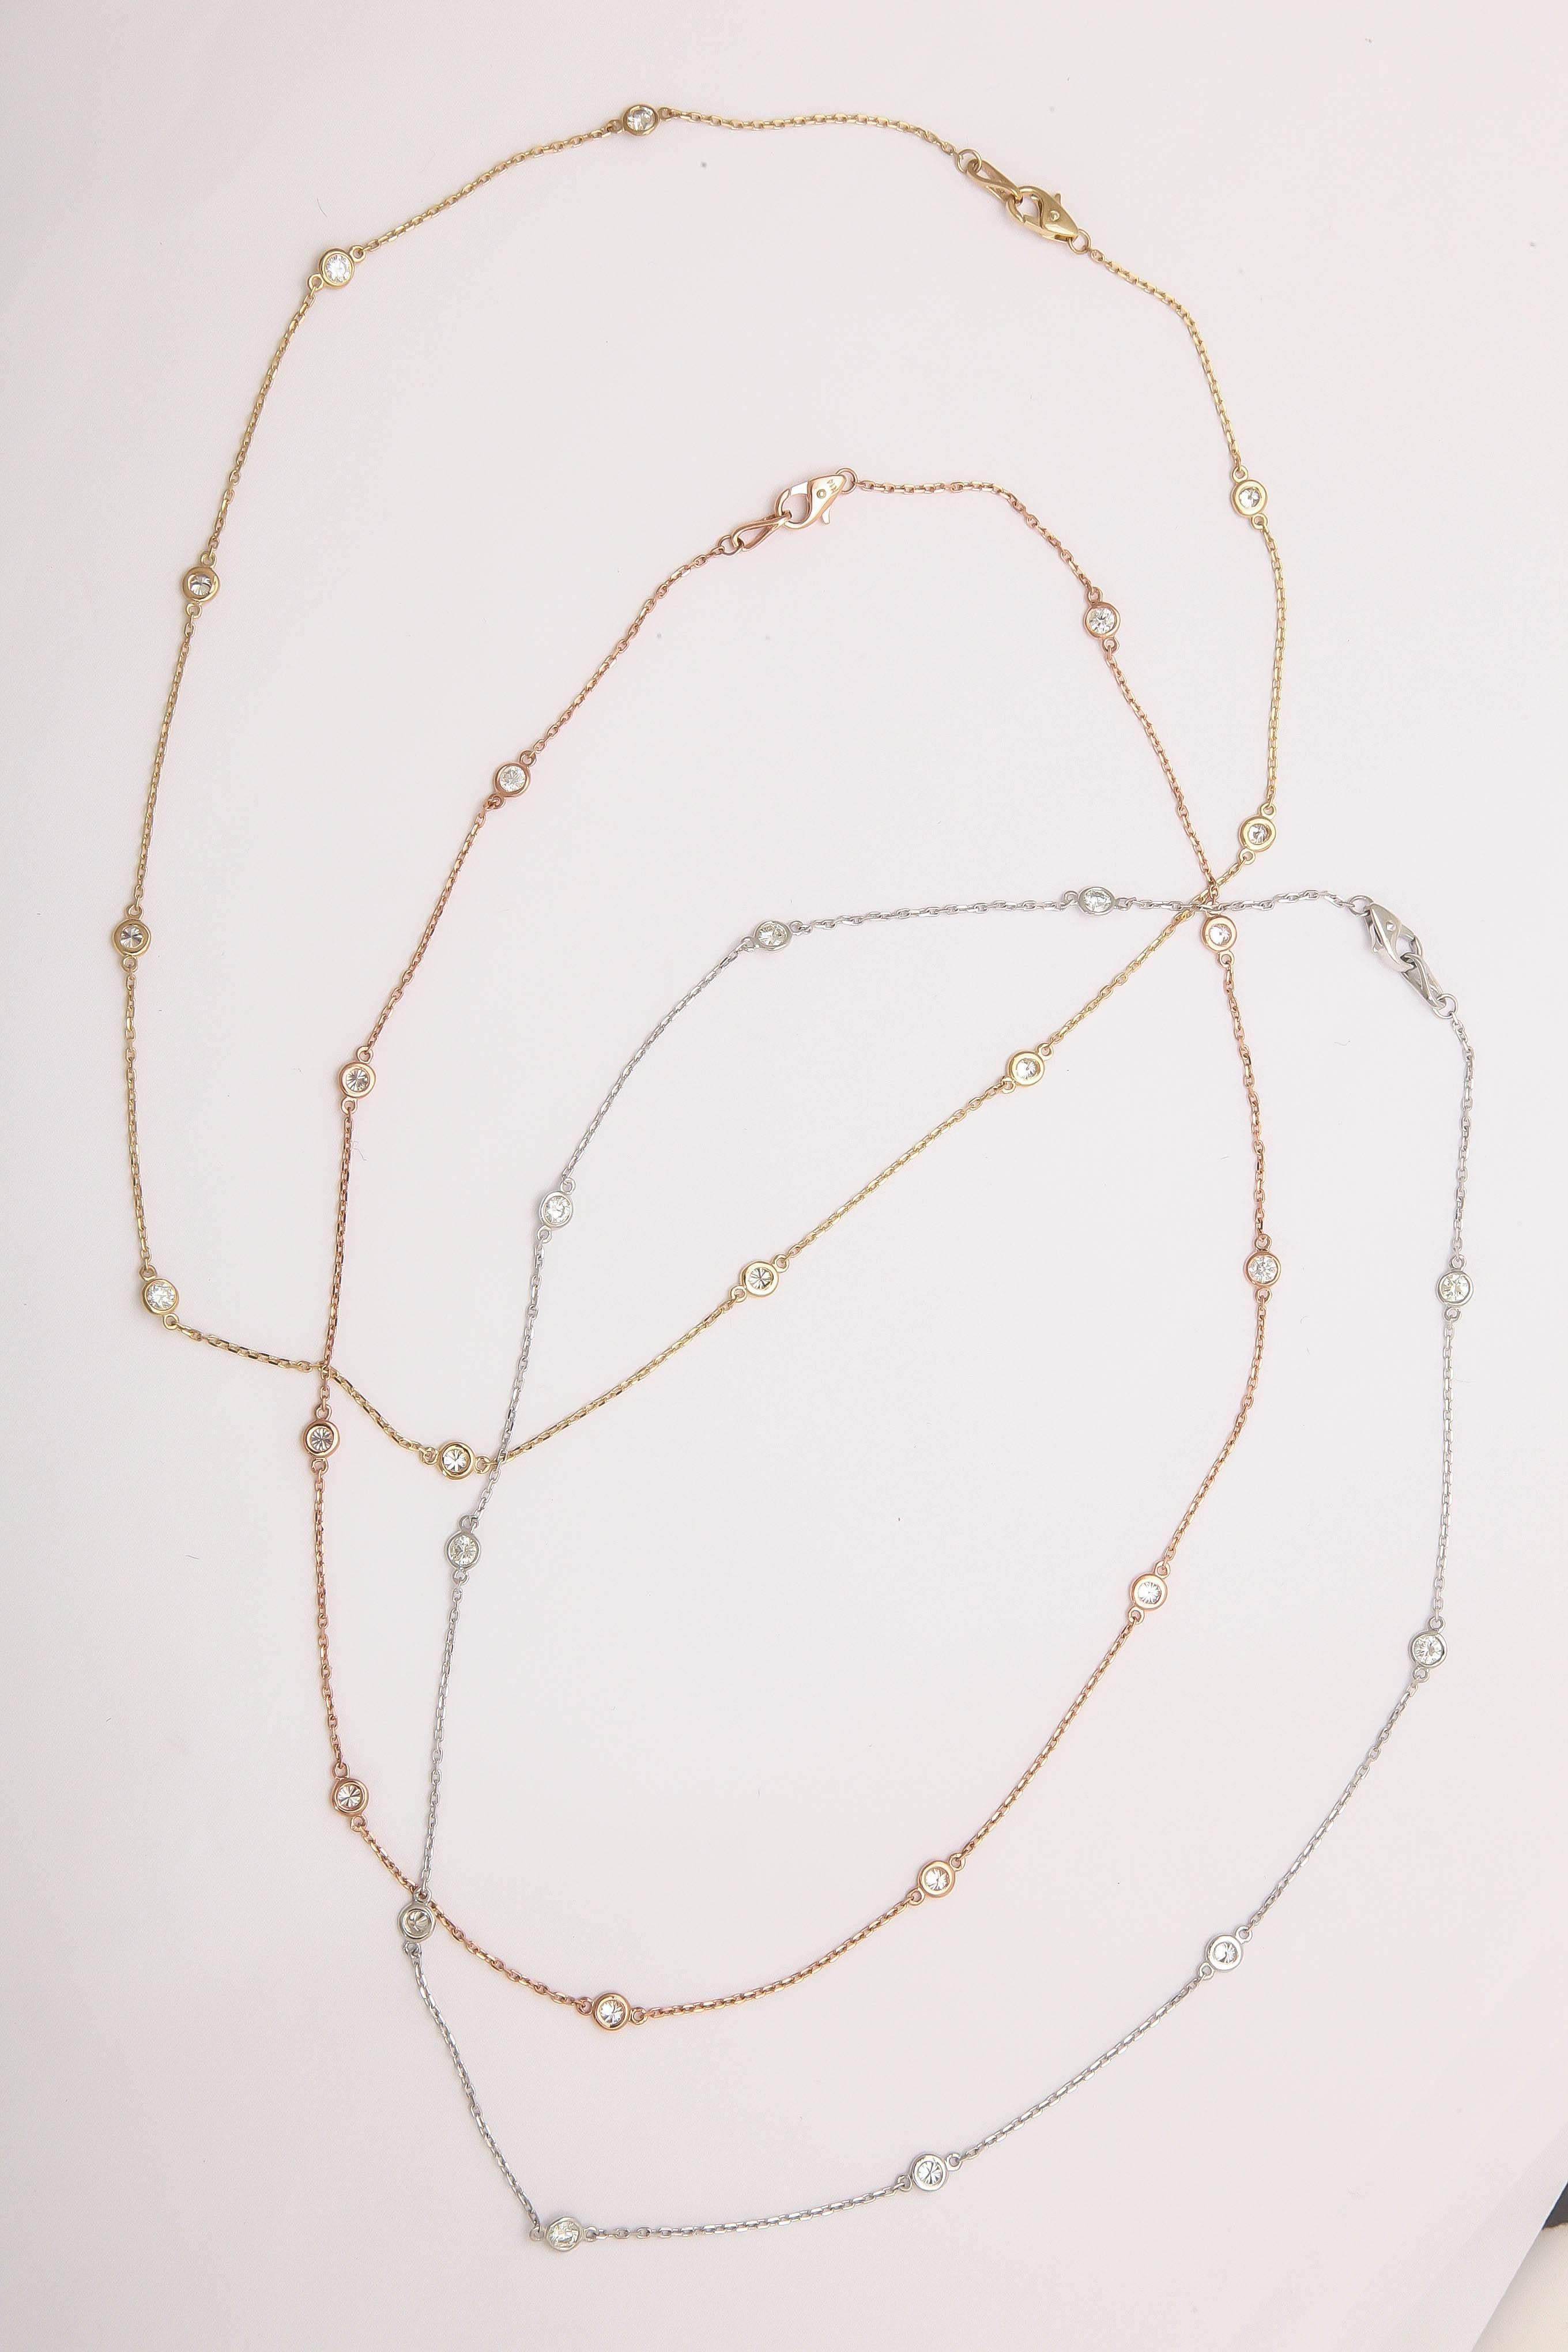 These necklaces are available in 14 kt yellow, white or rose gold. There are 10  diamonds  in each necklace averaging 1.10 cts. The quality of the diamonds is G-H color, SI 2 clarity. All necklaces are 18 in. and priced at $2275.00 each.